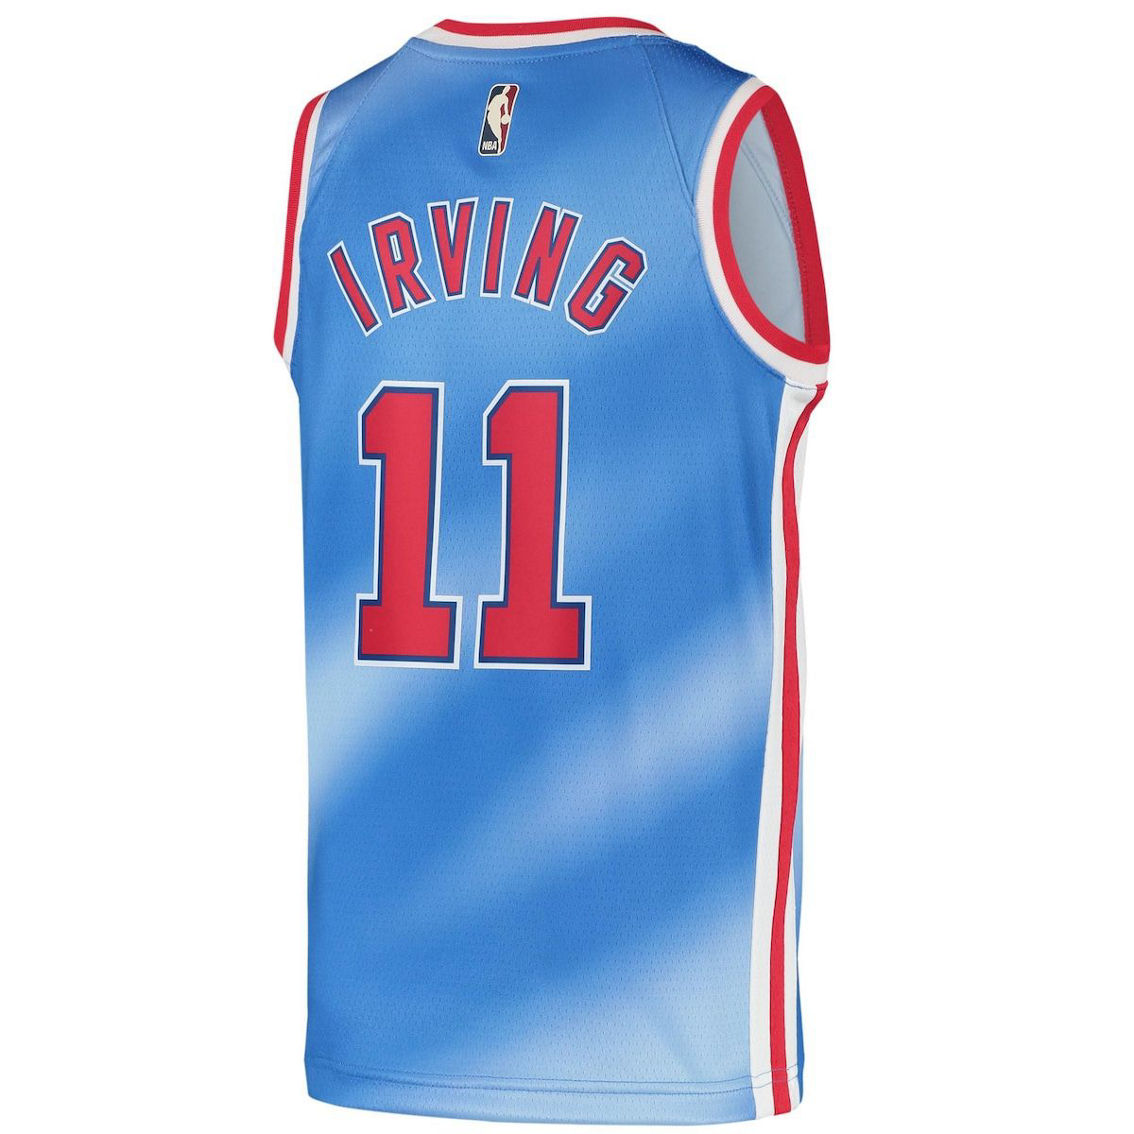 Nike Youth Kyrie Irving Light Blue Brooklyn Nets 2020/21 Jersey - Classic Edition - Image 4 of 4